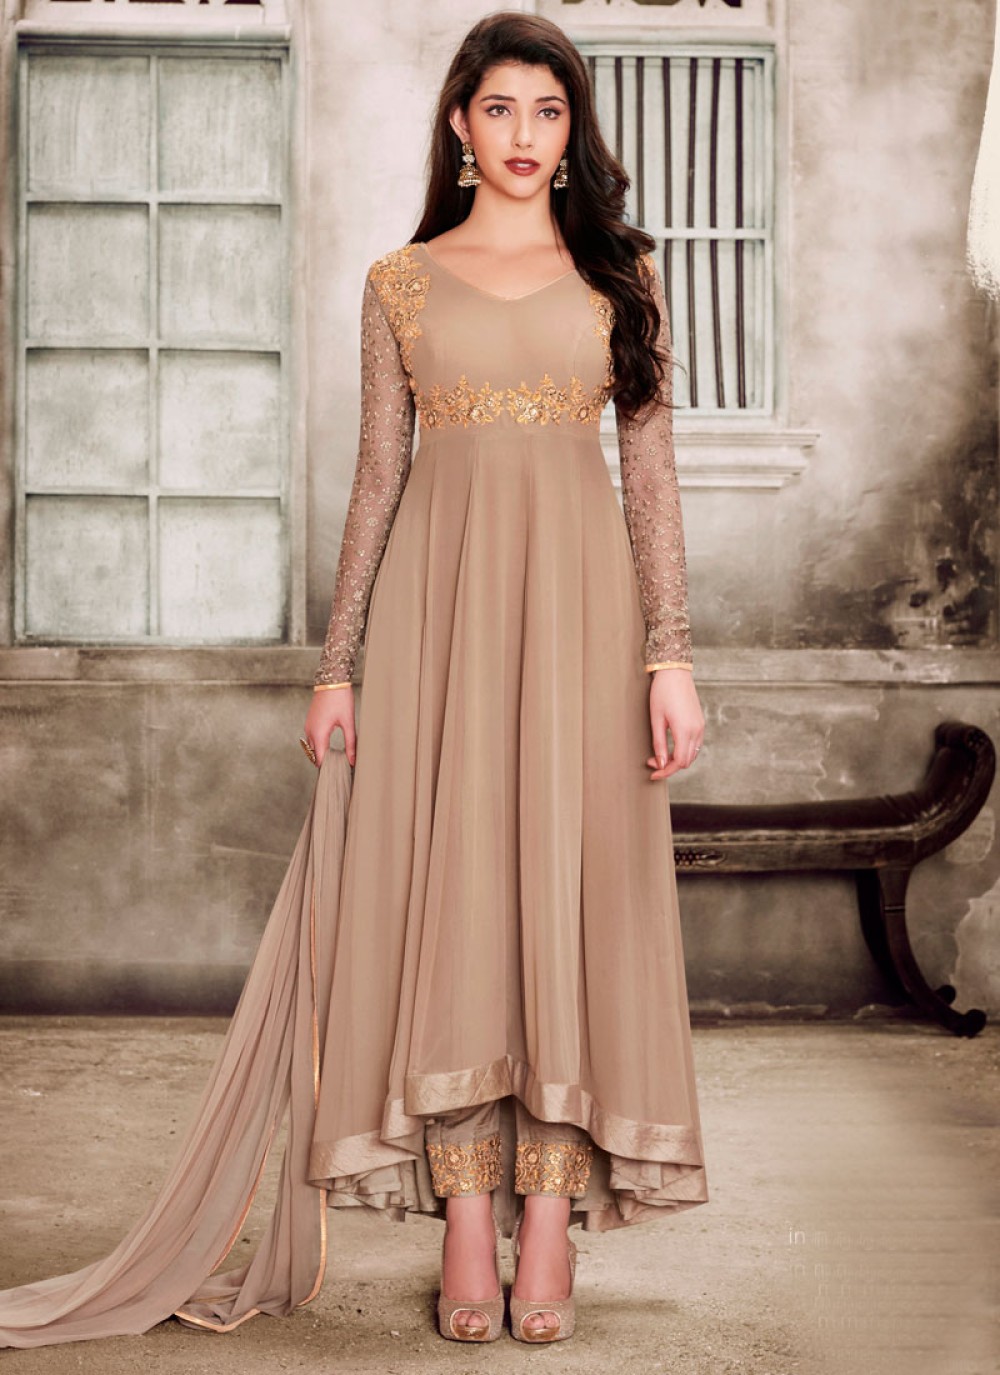 Dresses in Fawn Colour - Fawn Bridal Clothing